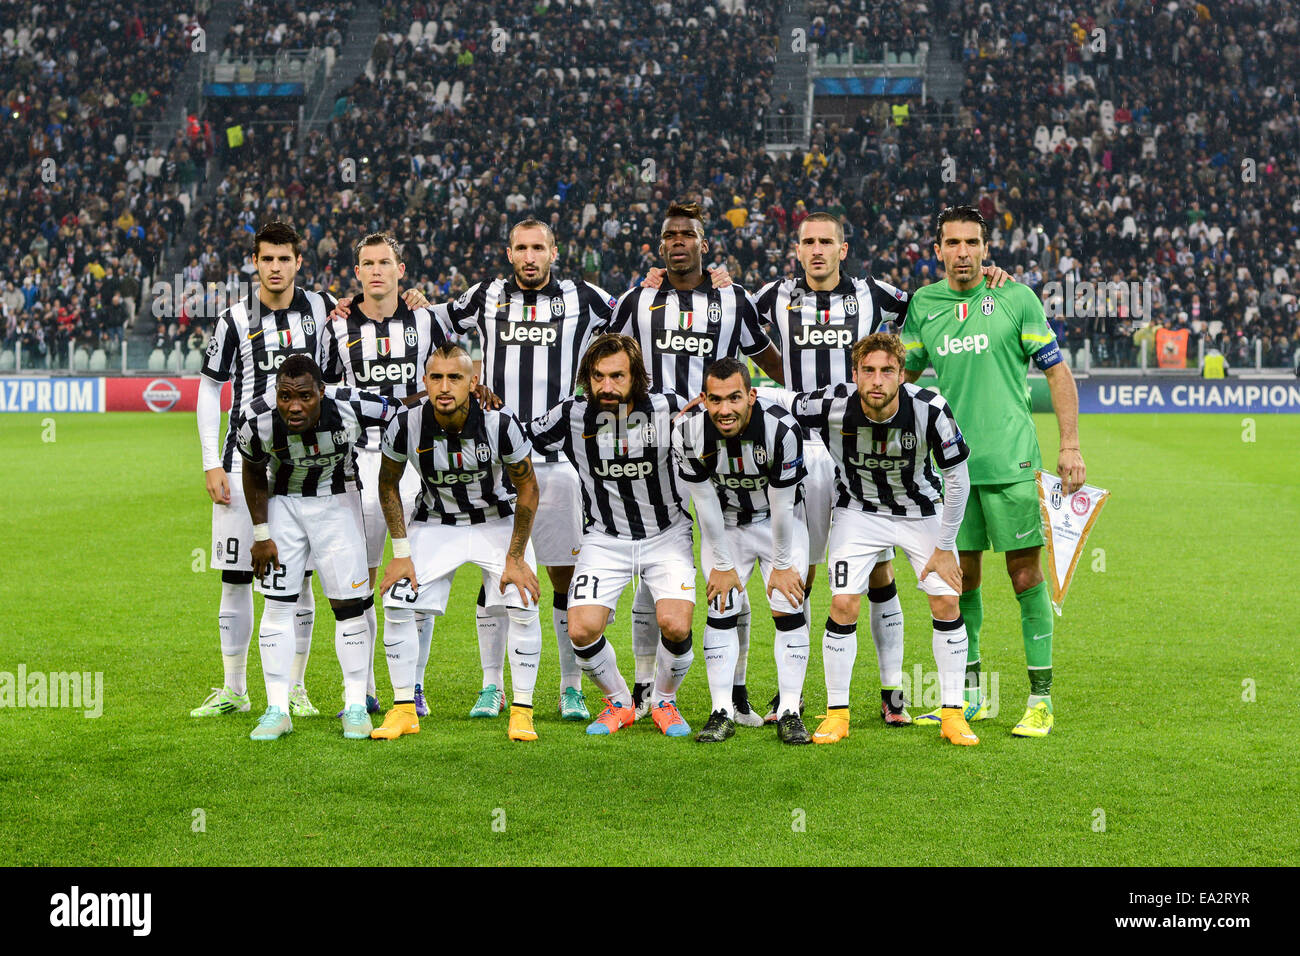 Turin, Italy. 4th Nov, 2014. Juventus team group line-up Football/Soccer :  UEFA Champions League Group A match between Juventus 3-2 Olympiacos at  Juventus Stadium in Turin, Italy . © Maurizio Borsari/AFLO/Alamy Live